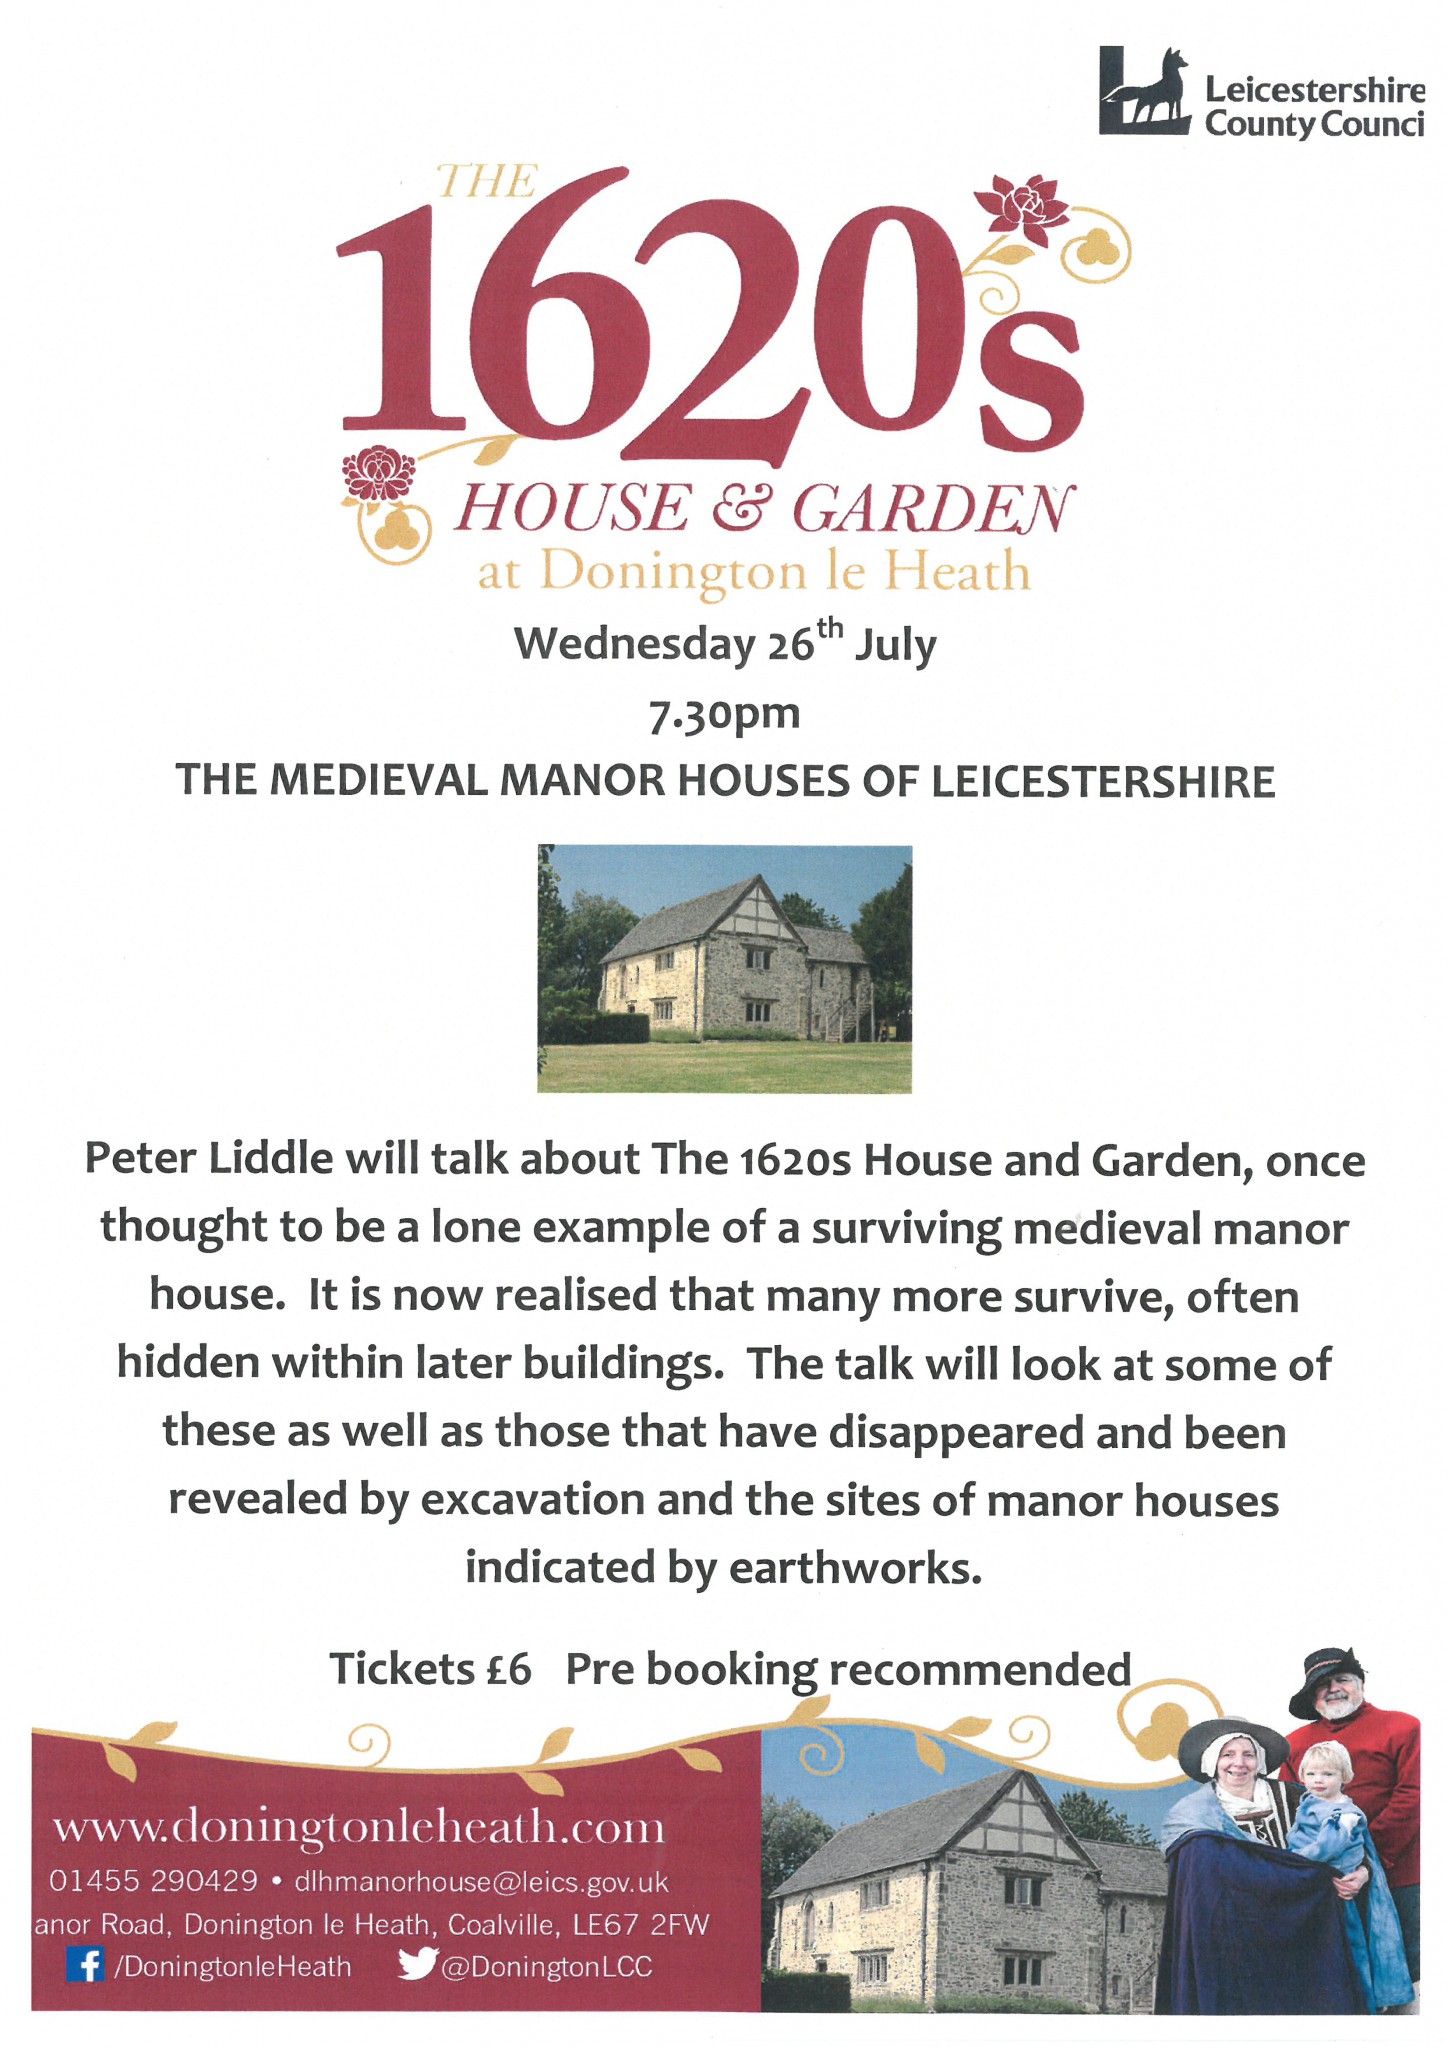 The Medieval Manor Houses of Leicestershire